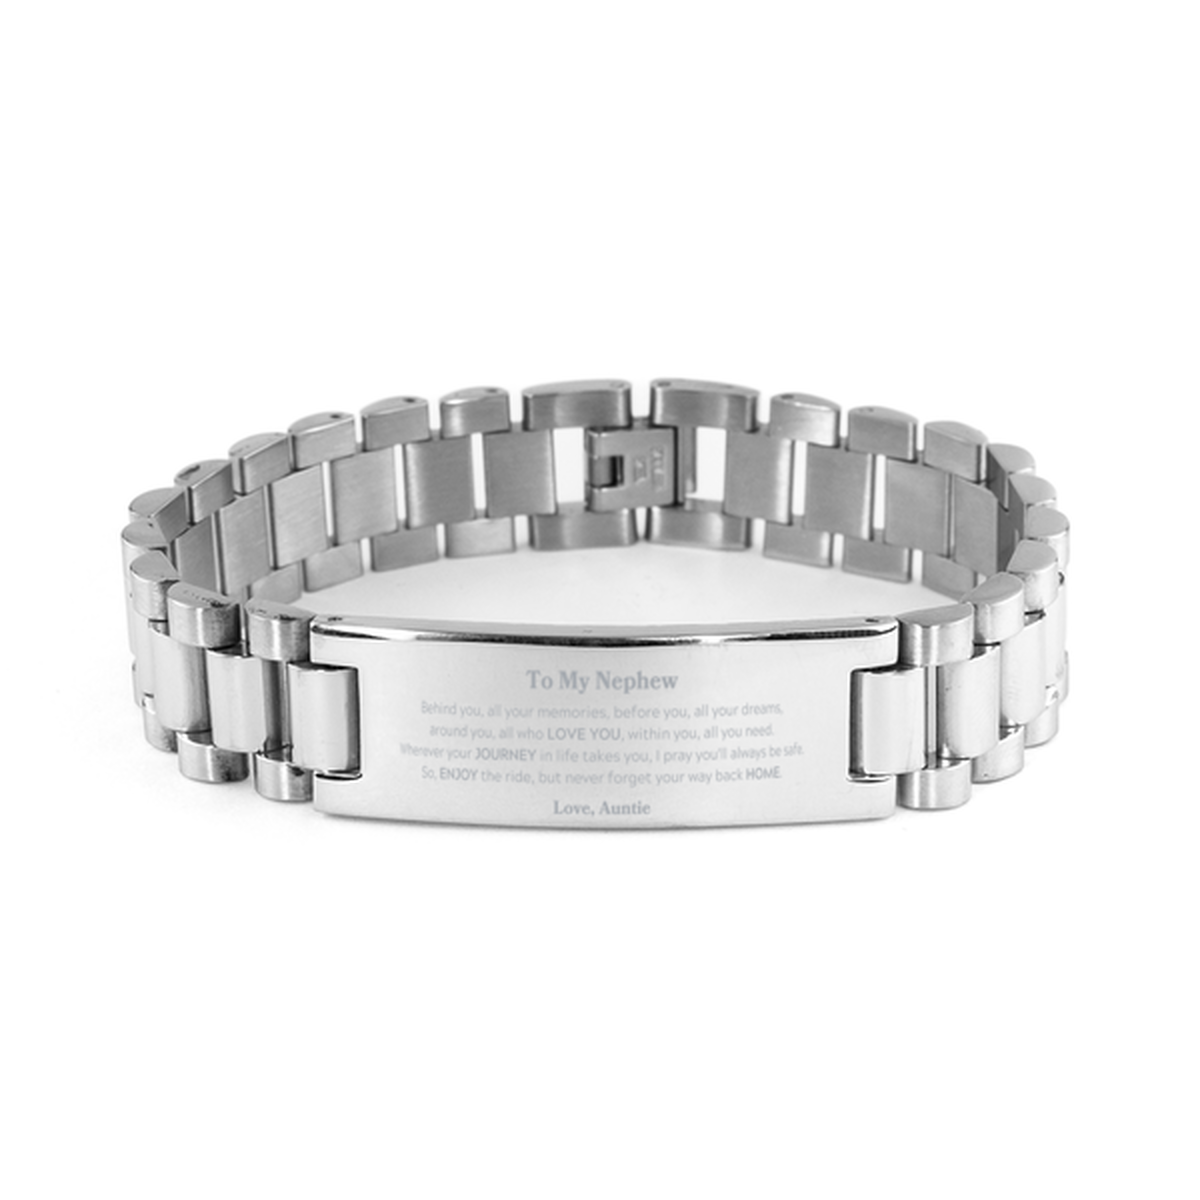 To My Nephew Graduation Gifts from Auntie, Nephew Ladder Stainless Steel Bracelet Christmas Birthday Gifts for Nephew Behind you, all your memories, before you, all your dreams. Love, Auntie